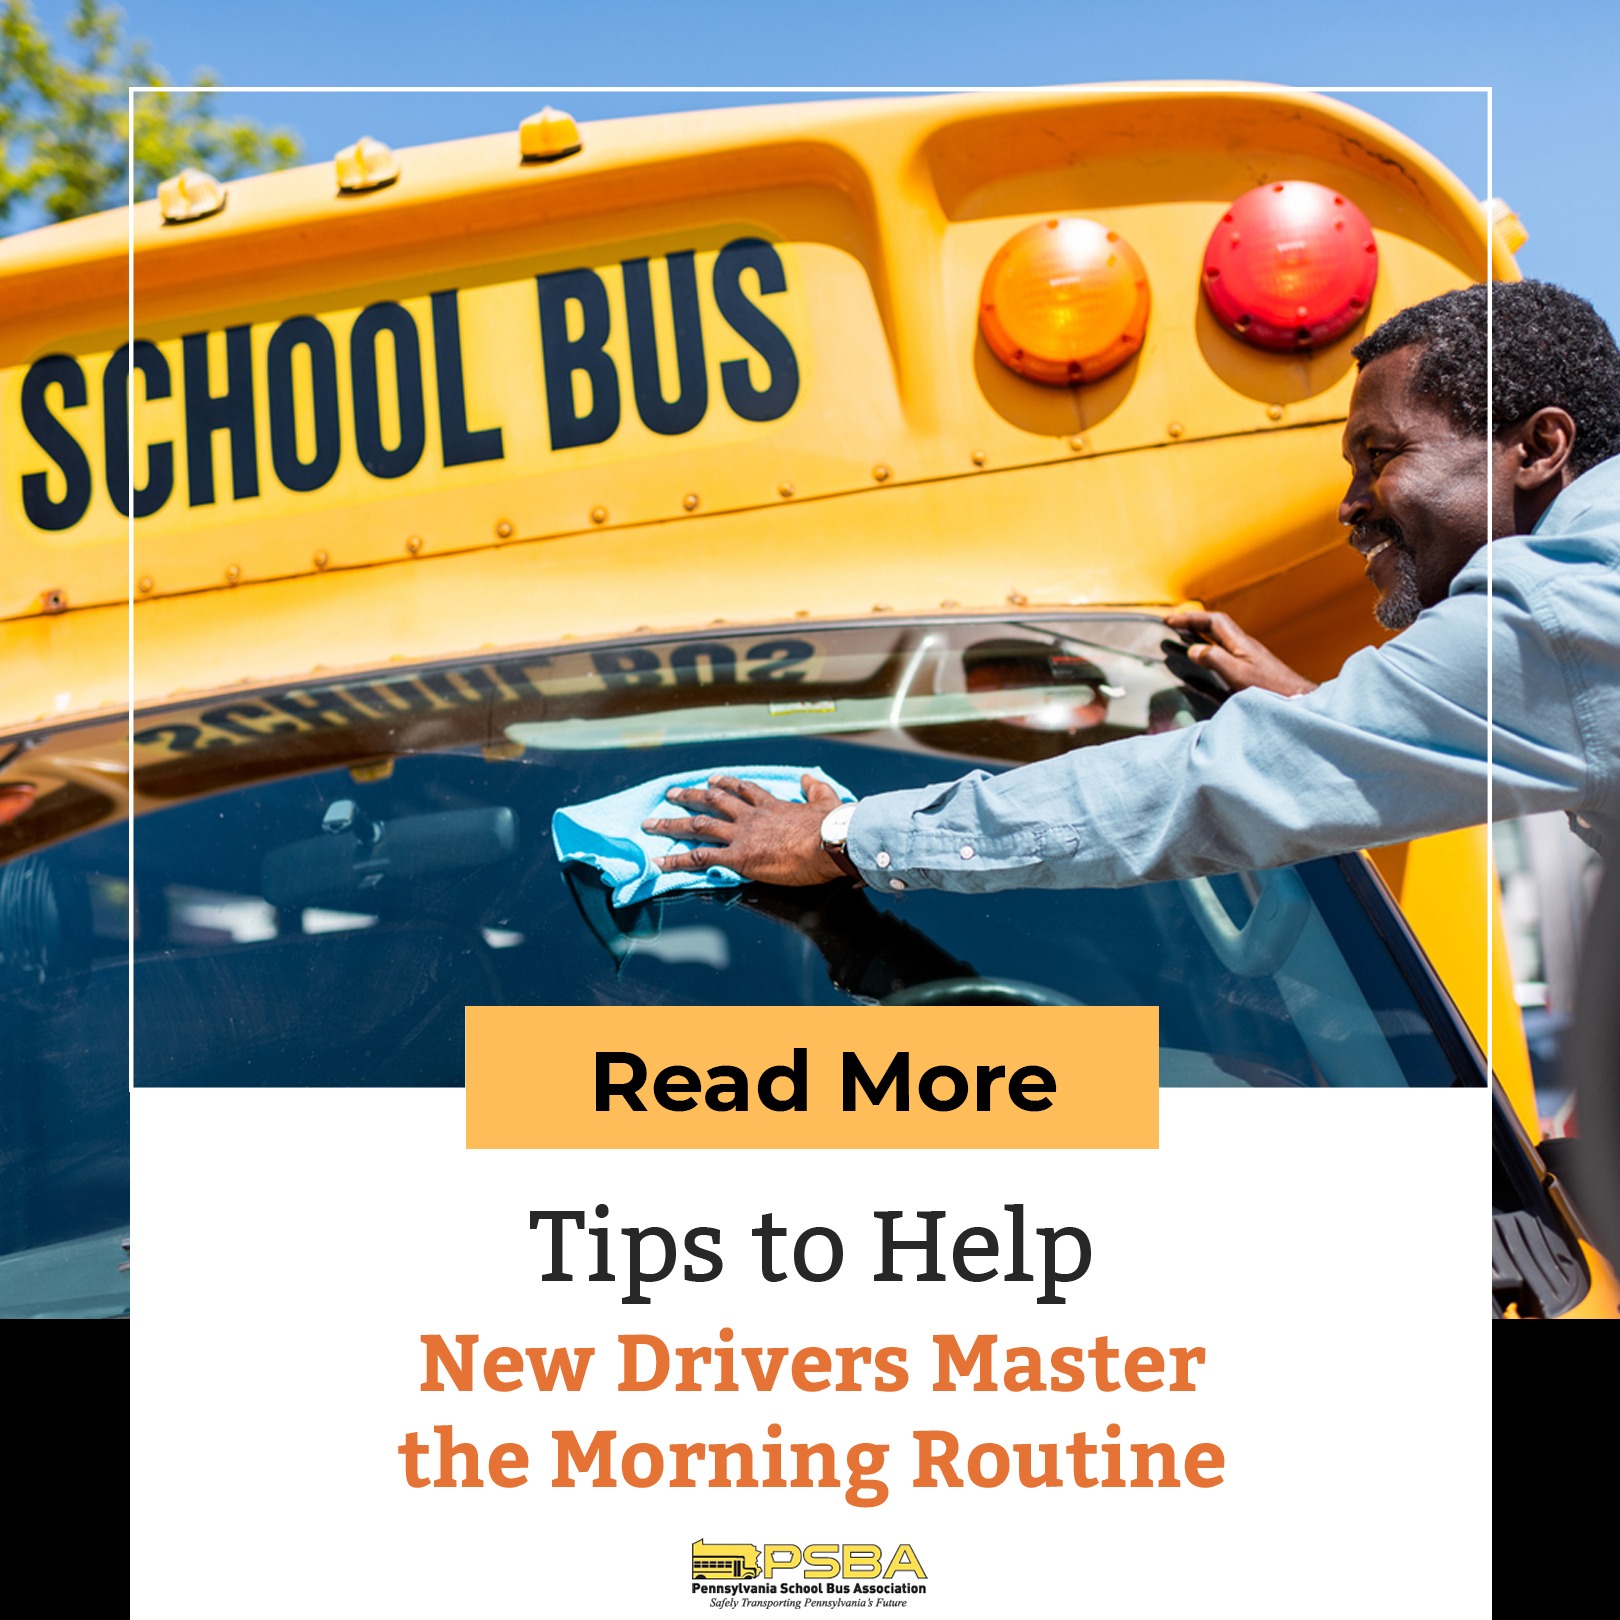 Tips to Help New Drivers Master the Morning Routine